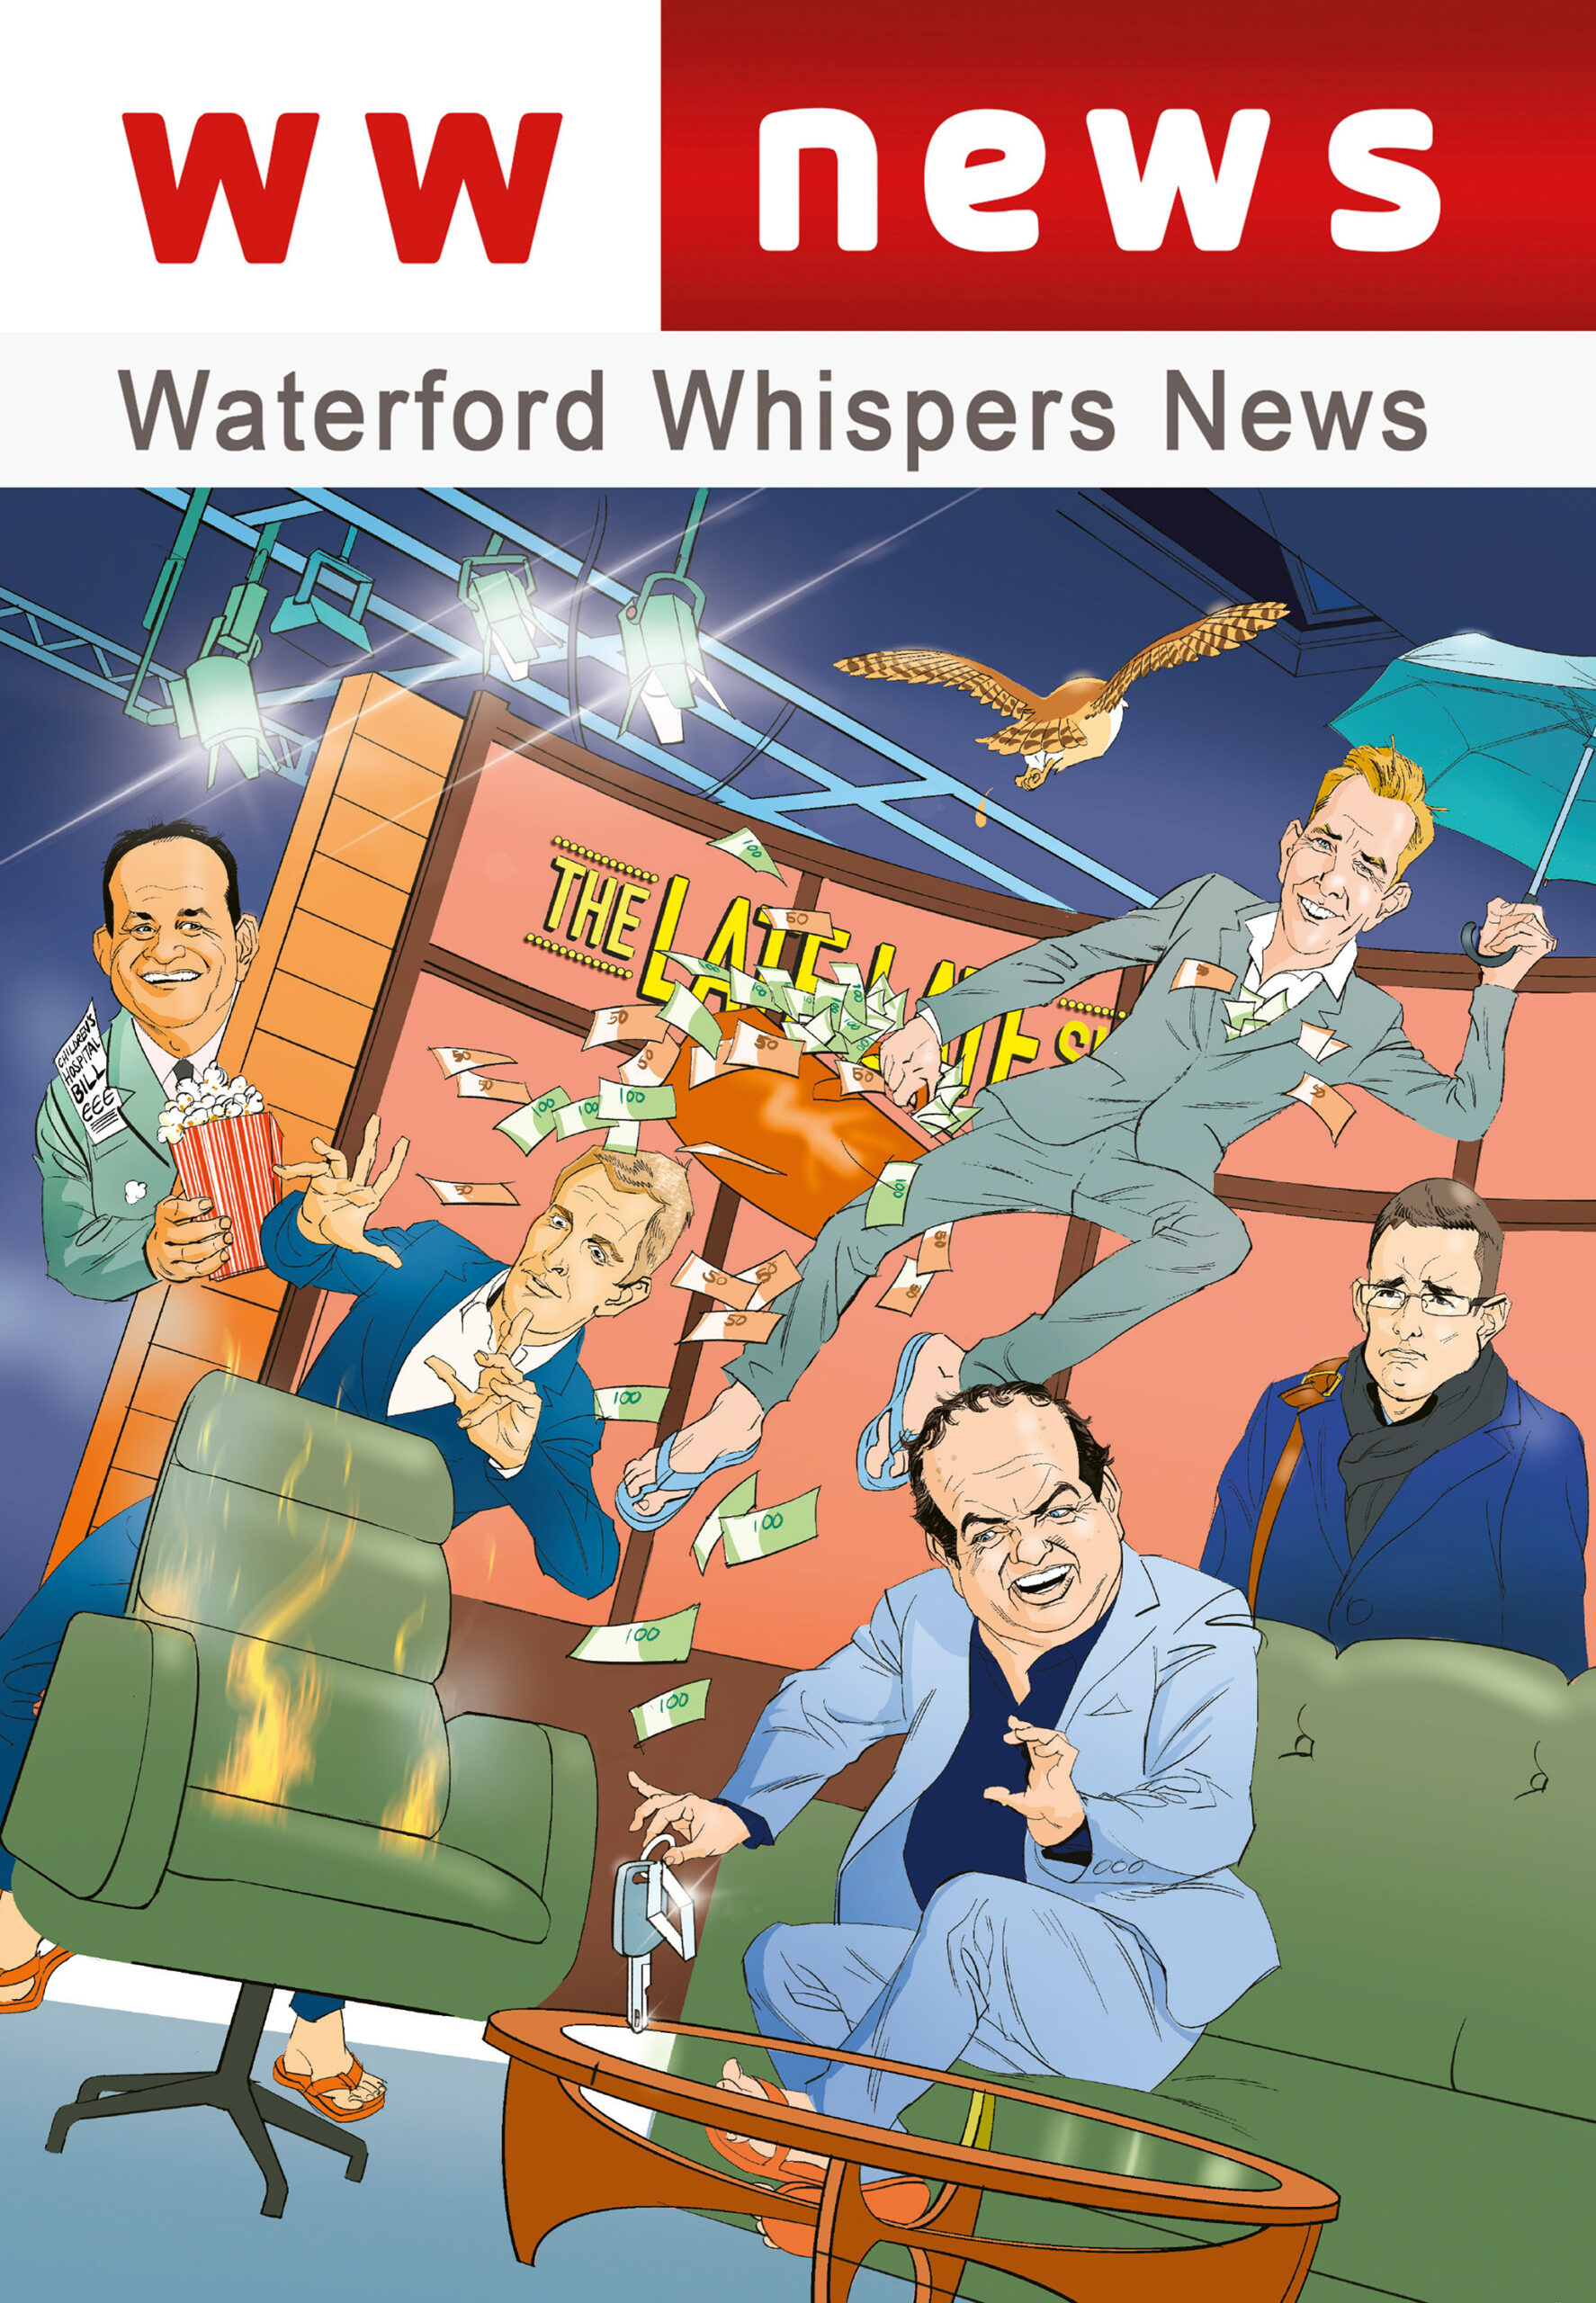 WWNews 2023 | Waterford Whispers News | Charlie Byrne's